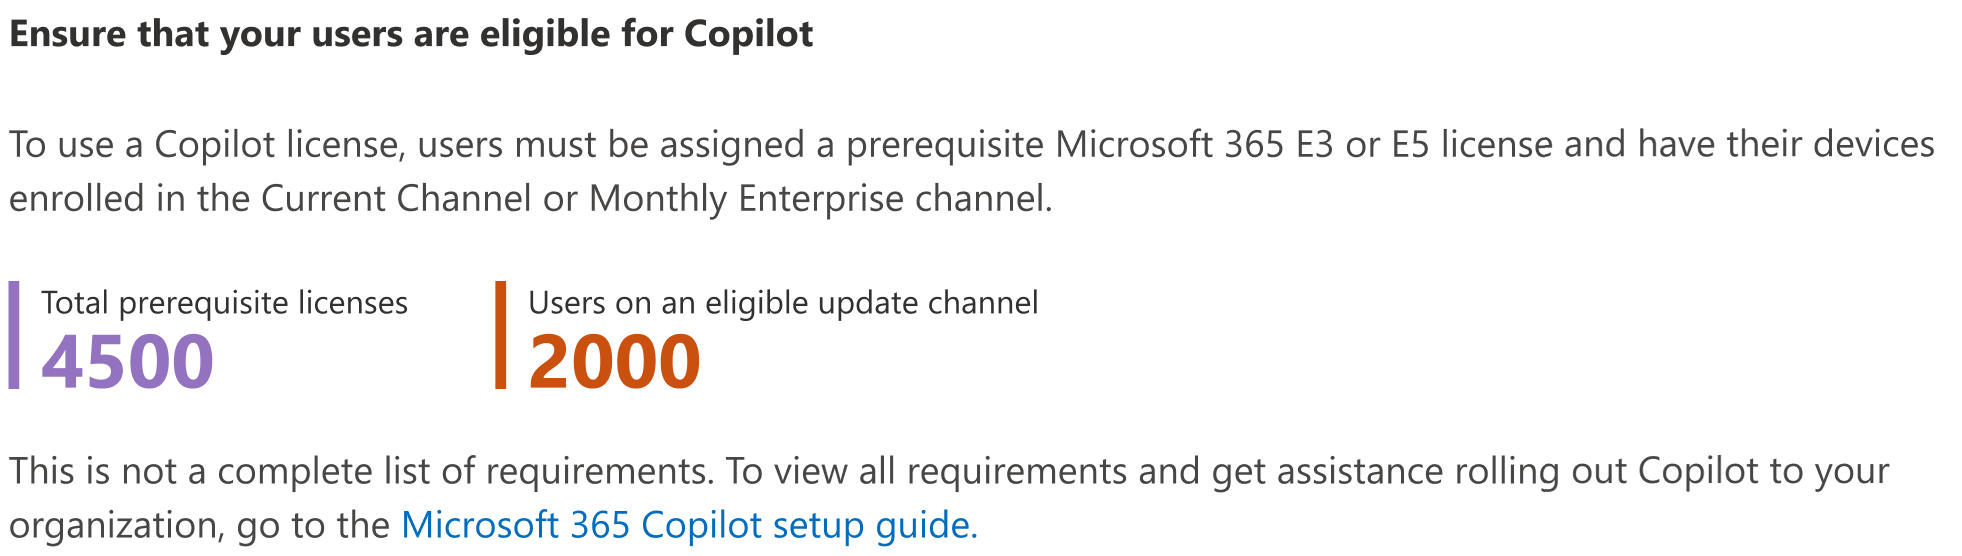 Screenshot showing how you can ensure users are eligible for Copilot for Microsoft 365.